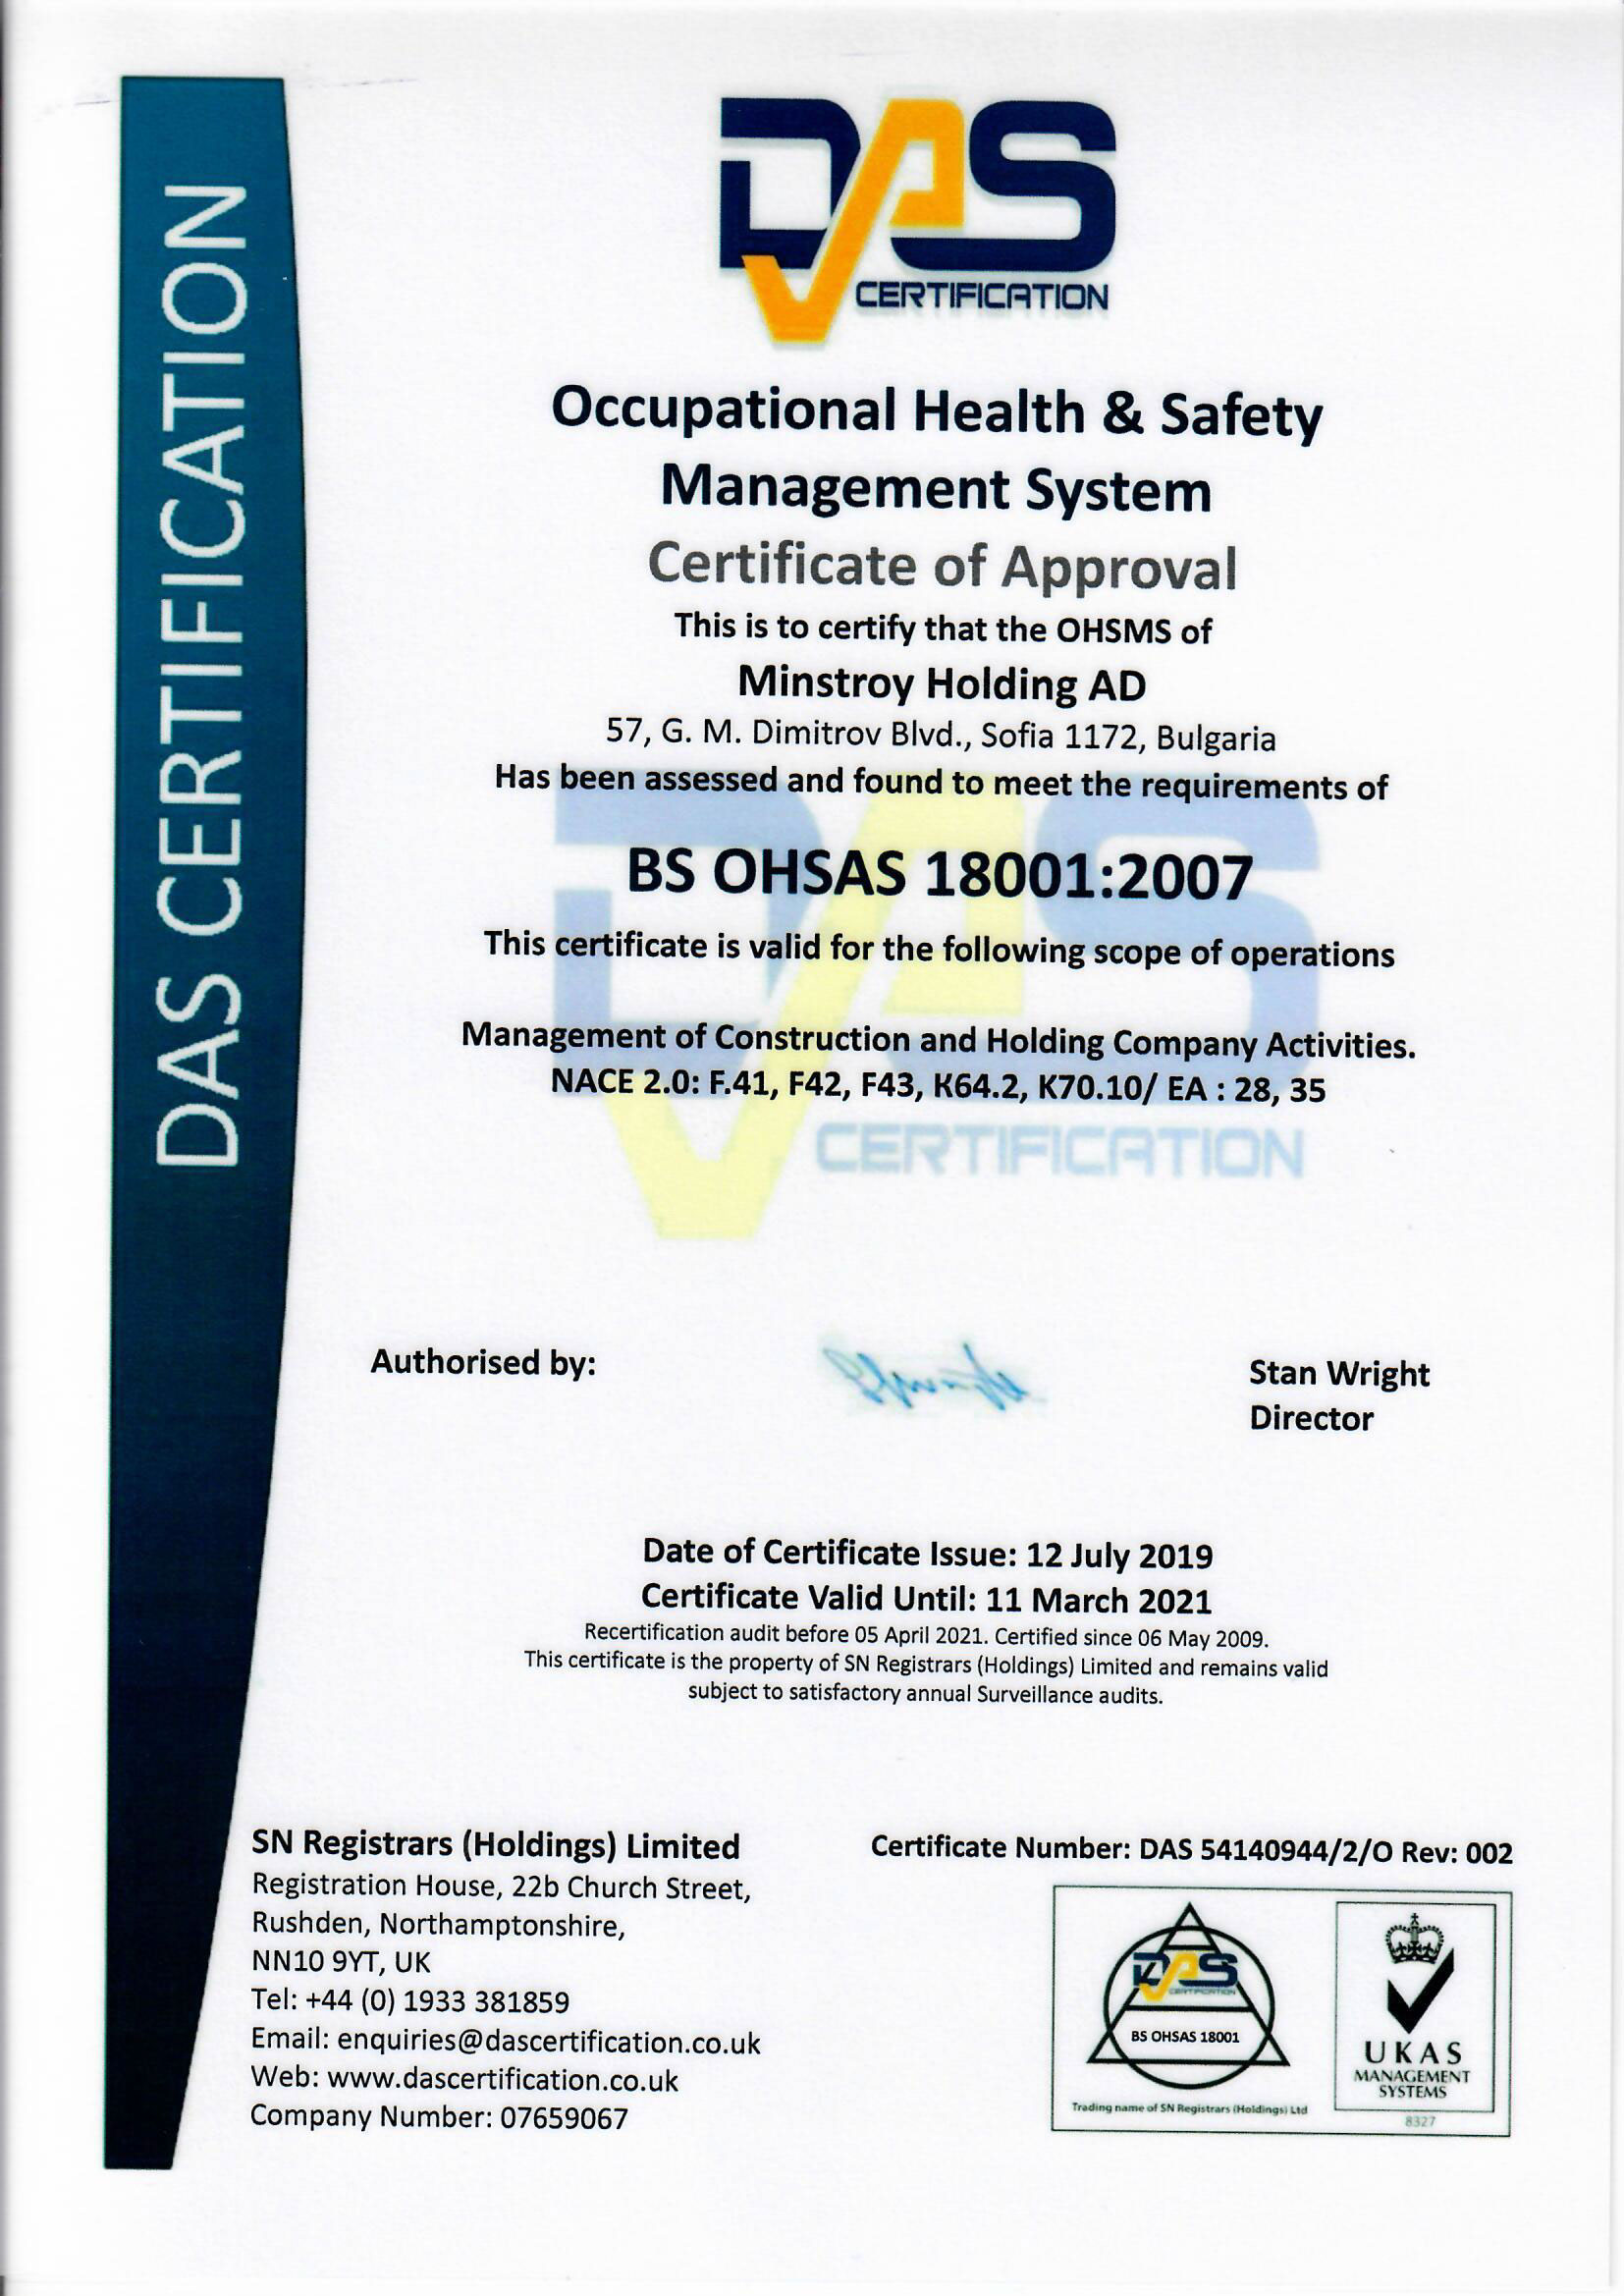 Occupational Health and Safety, according to ВS OHSAS 18001:2007;